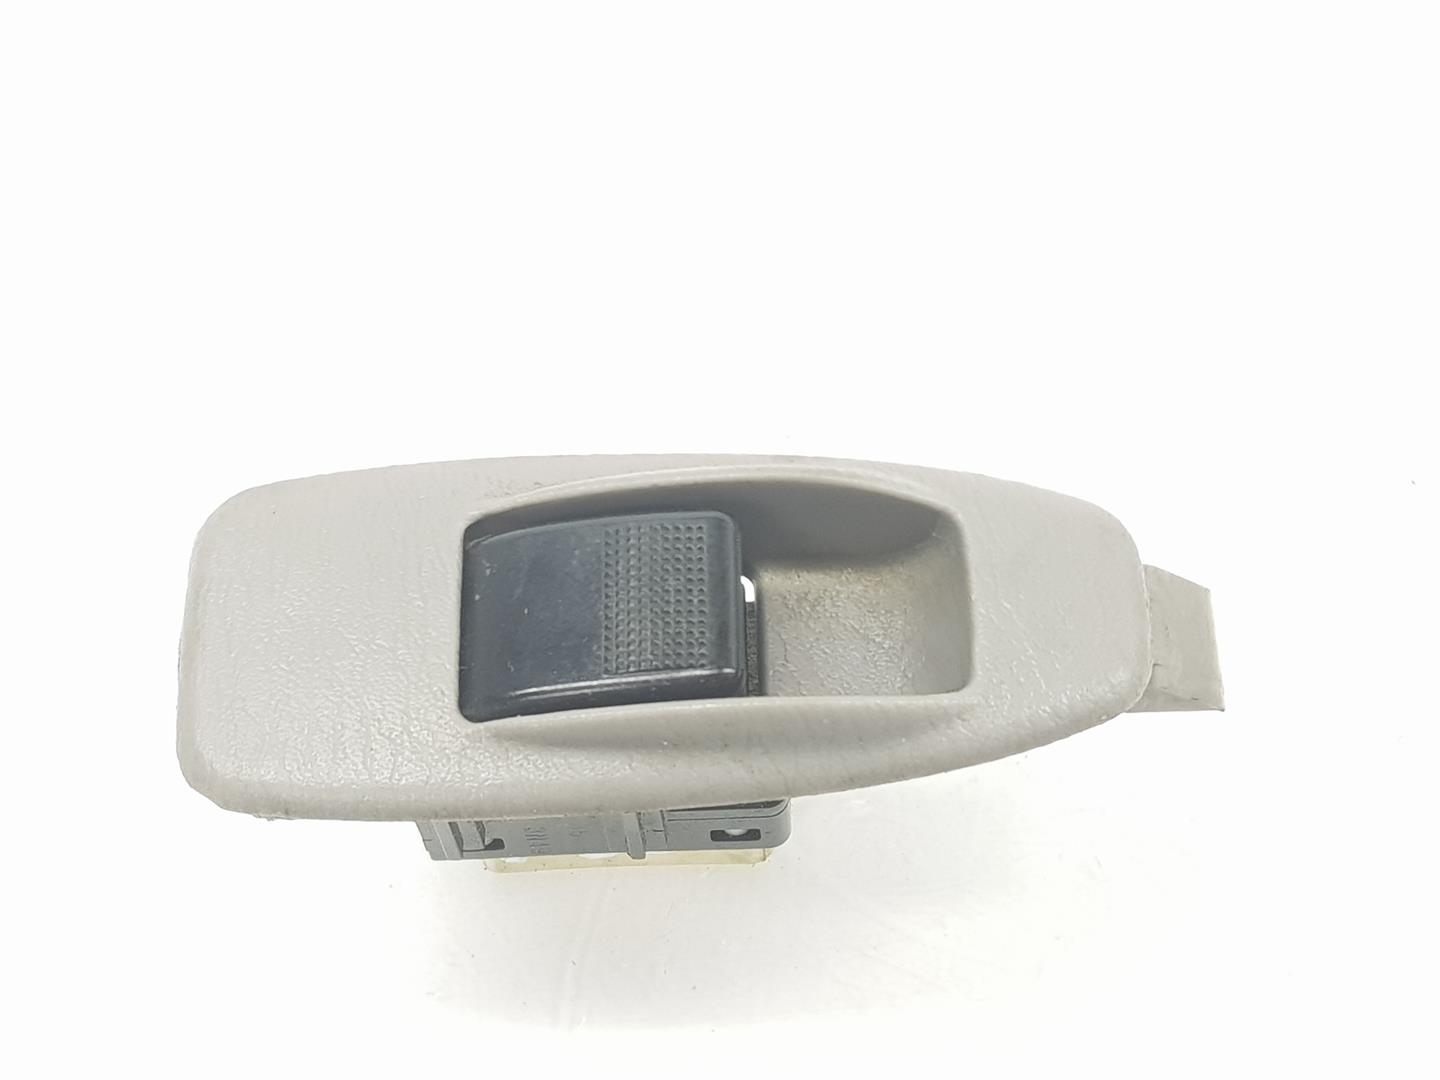 MAZDA Premacy CP (1999-2005) Rear Right Door Window Control Switch GE4T66370A, GE4T66370A 21623582